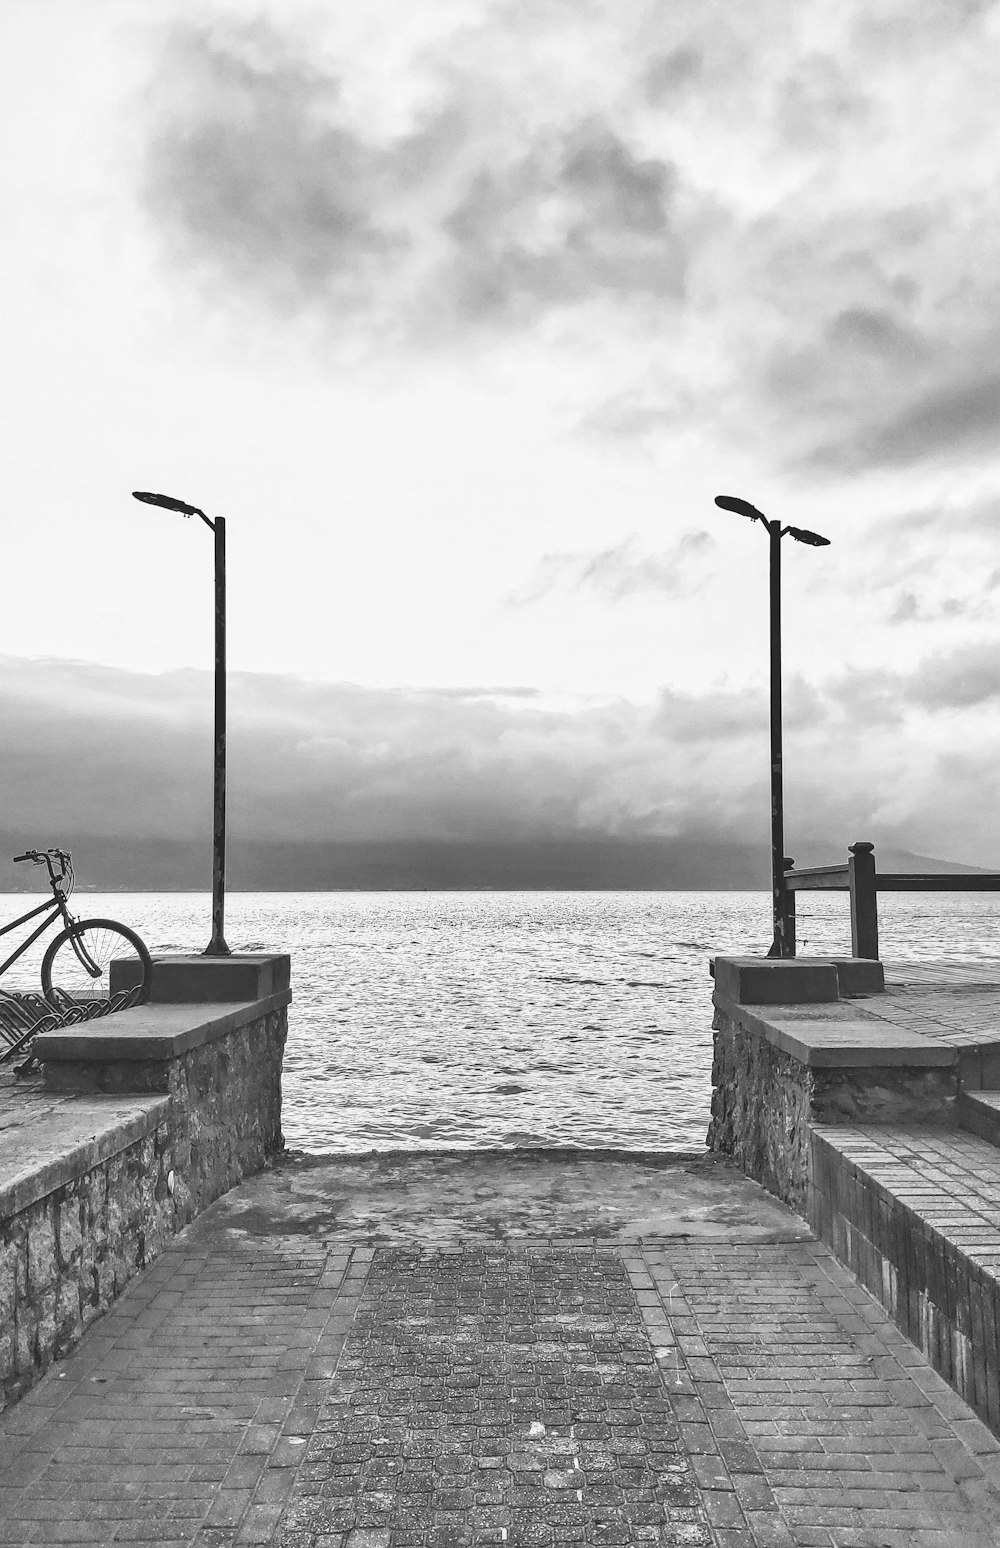 black bicycle on gray concrete dock near body of water